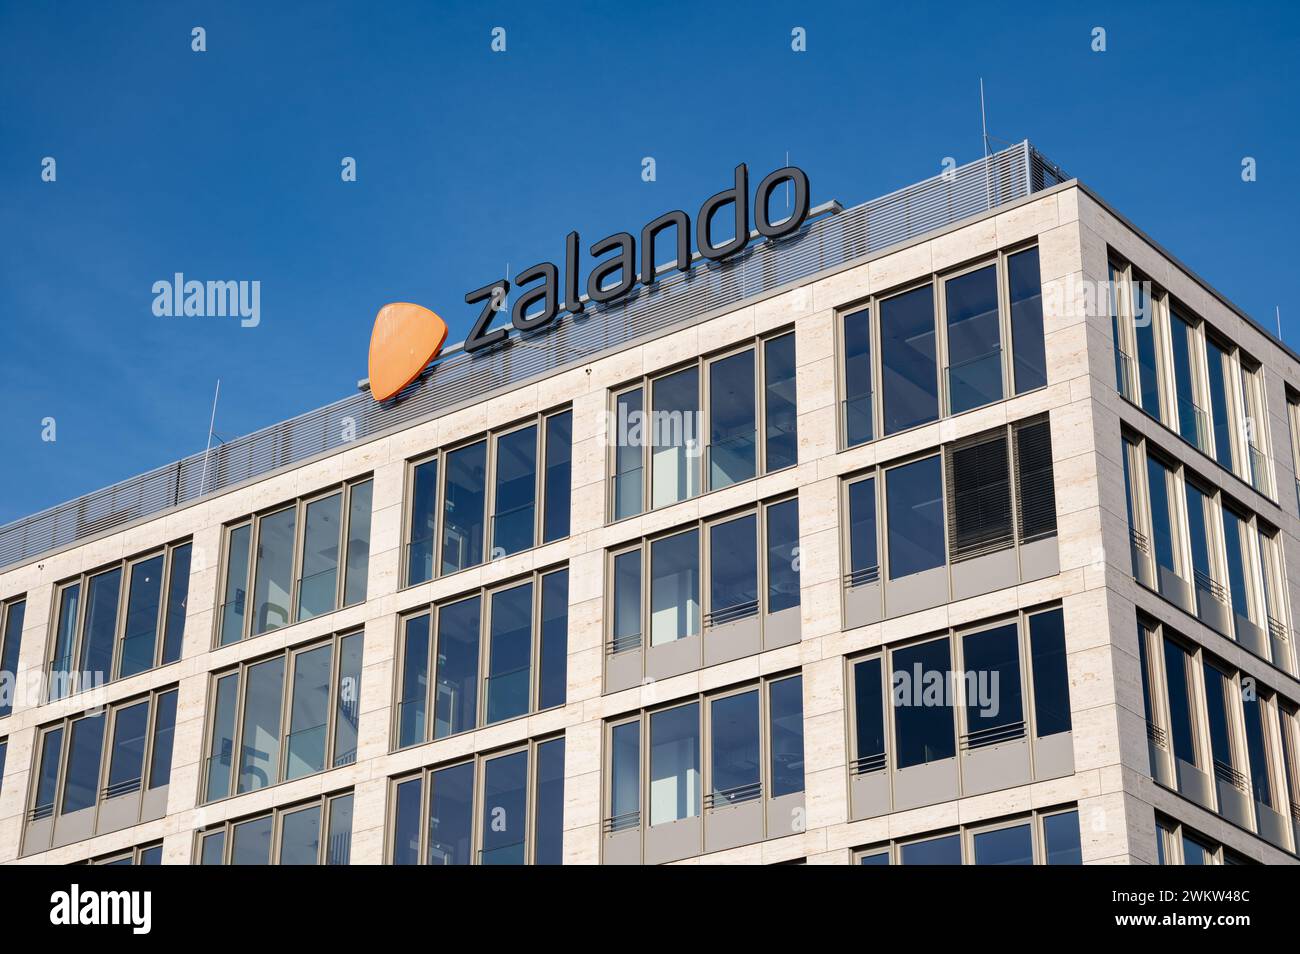 22.11.2023, Berlin, Germany, Europe - Lettering of online mail order company Zalando on an office building in Berlin's locality of Friedrichshain. Stock Photo